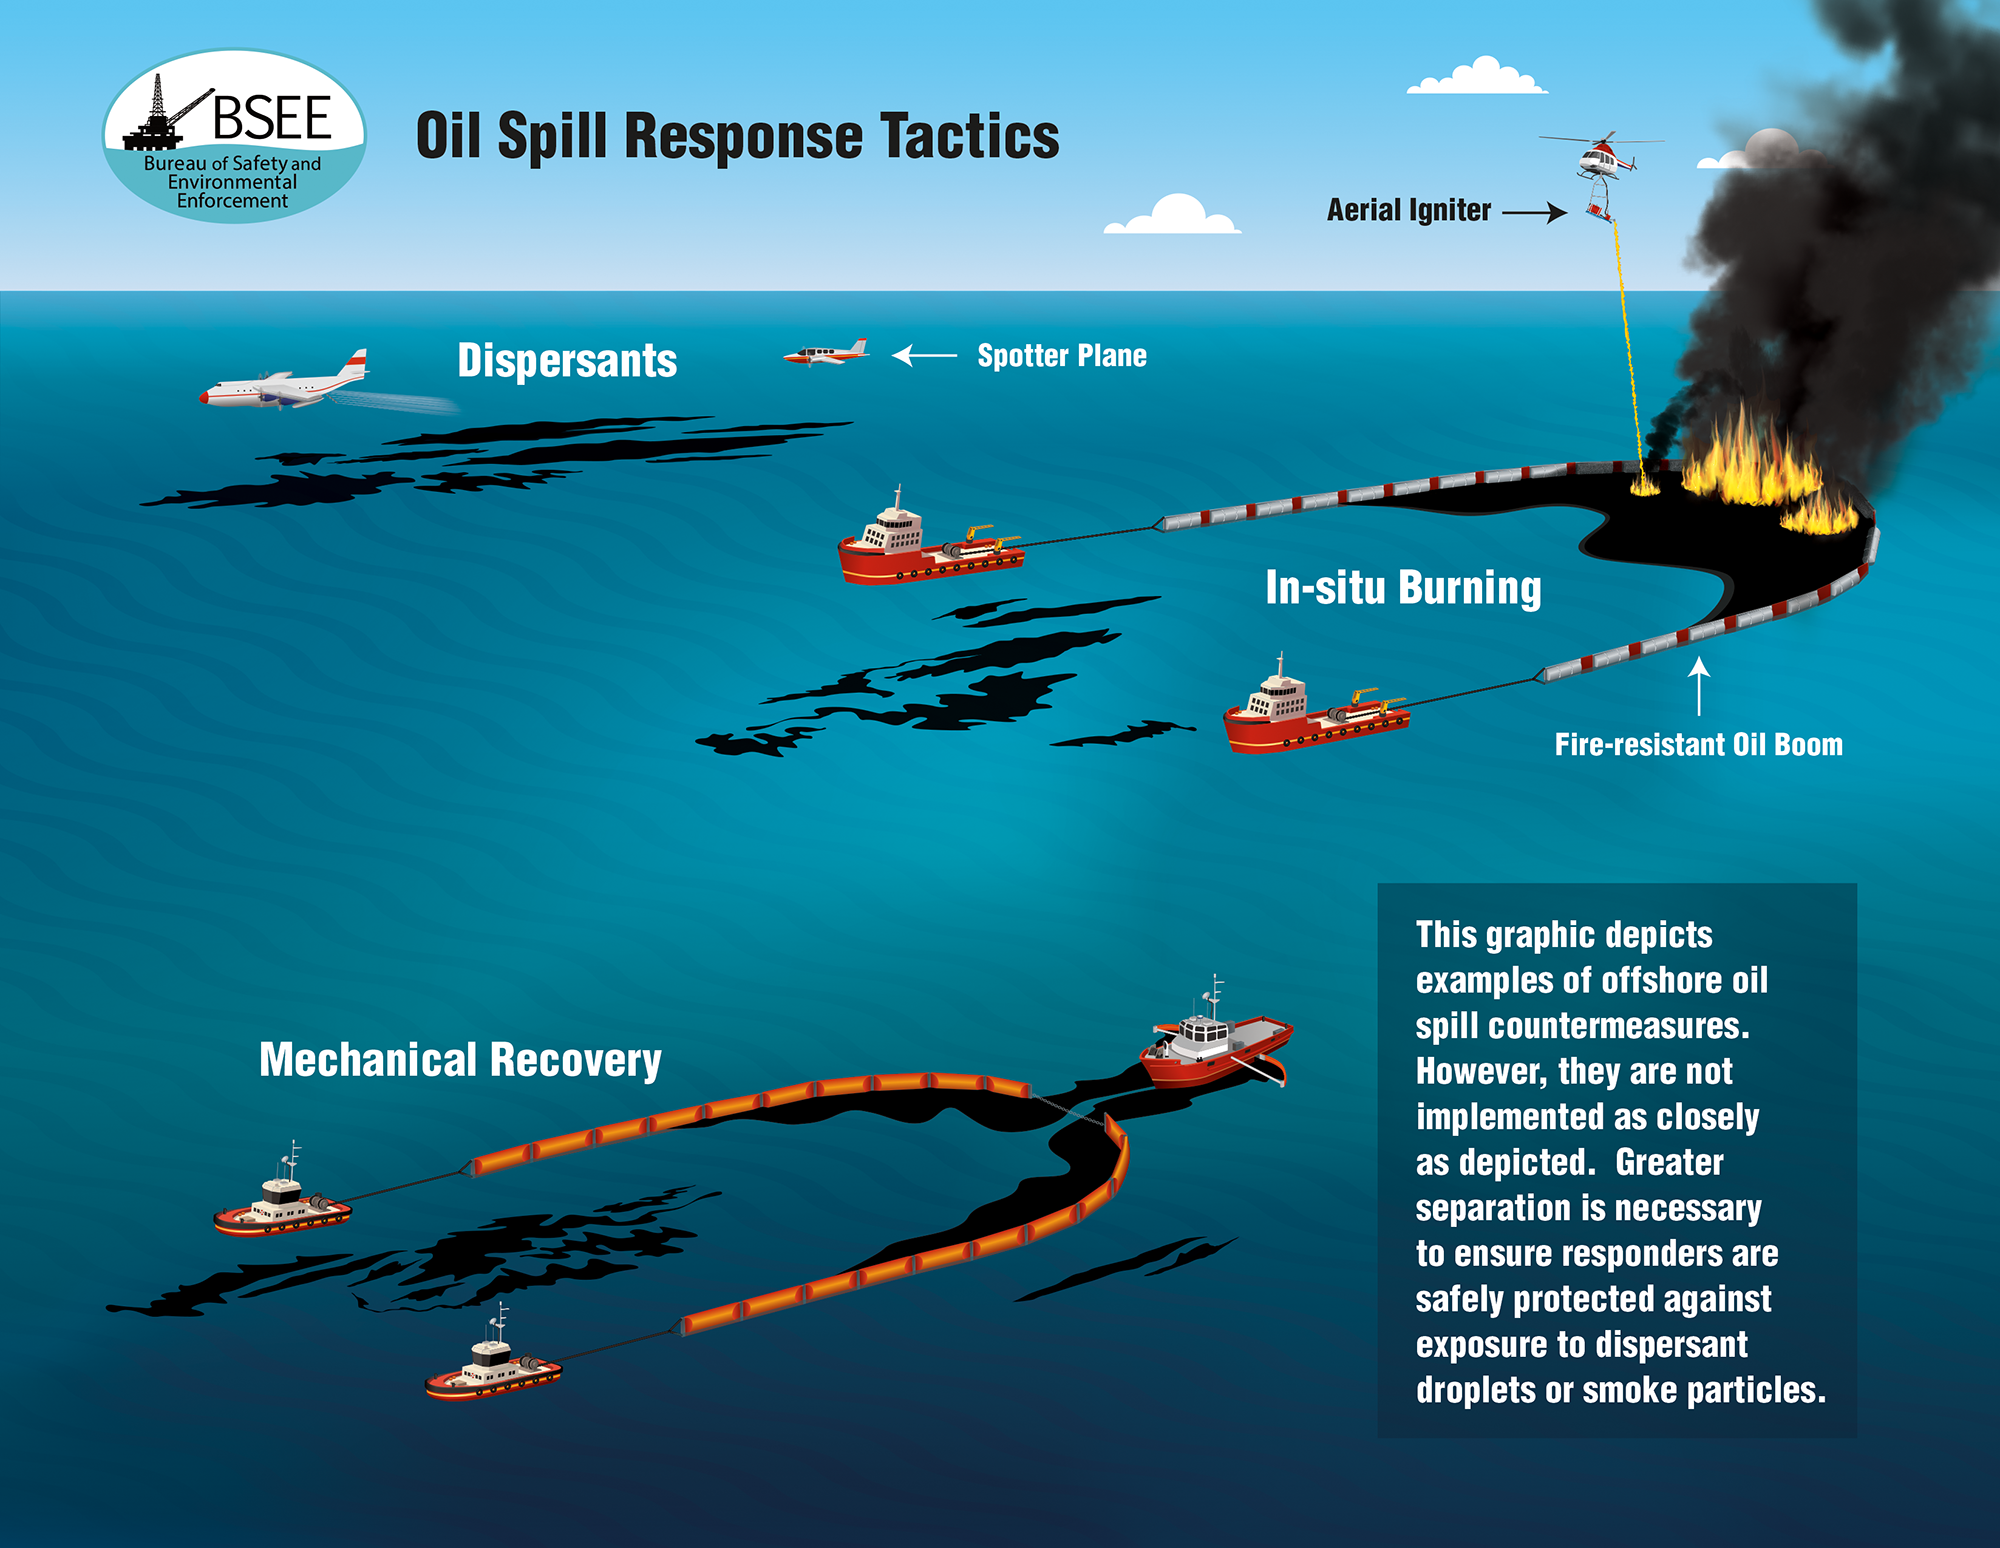 Oil spill response tactics like the ones shown here are described in and exercised from the industry Oil Spill Response Plans reviewed by BSEE in its Oil Spill Preparedness Program. The science, technologies, and policies associated with spill response tactics and strategies are also improved through the program’s R&D initiatives.